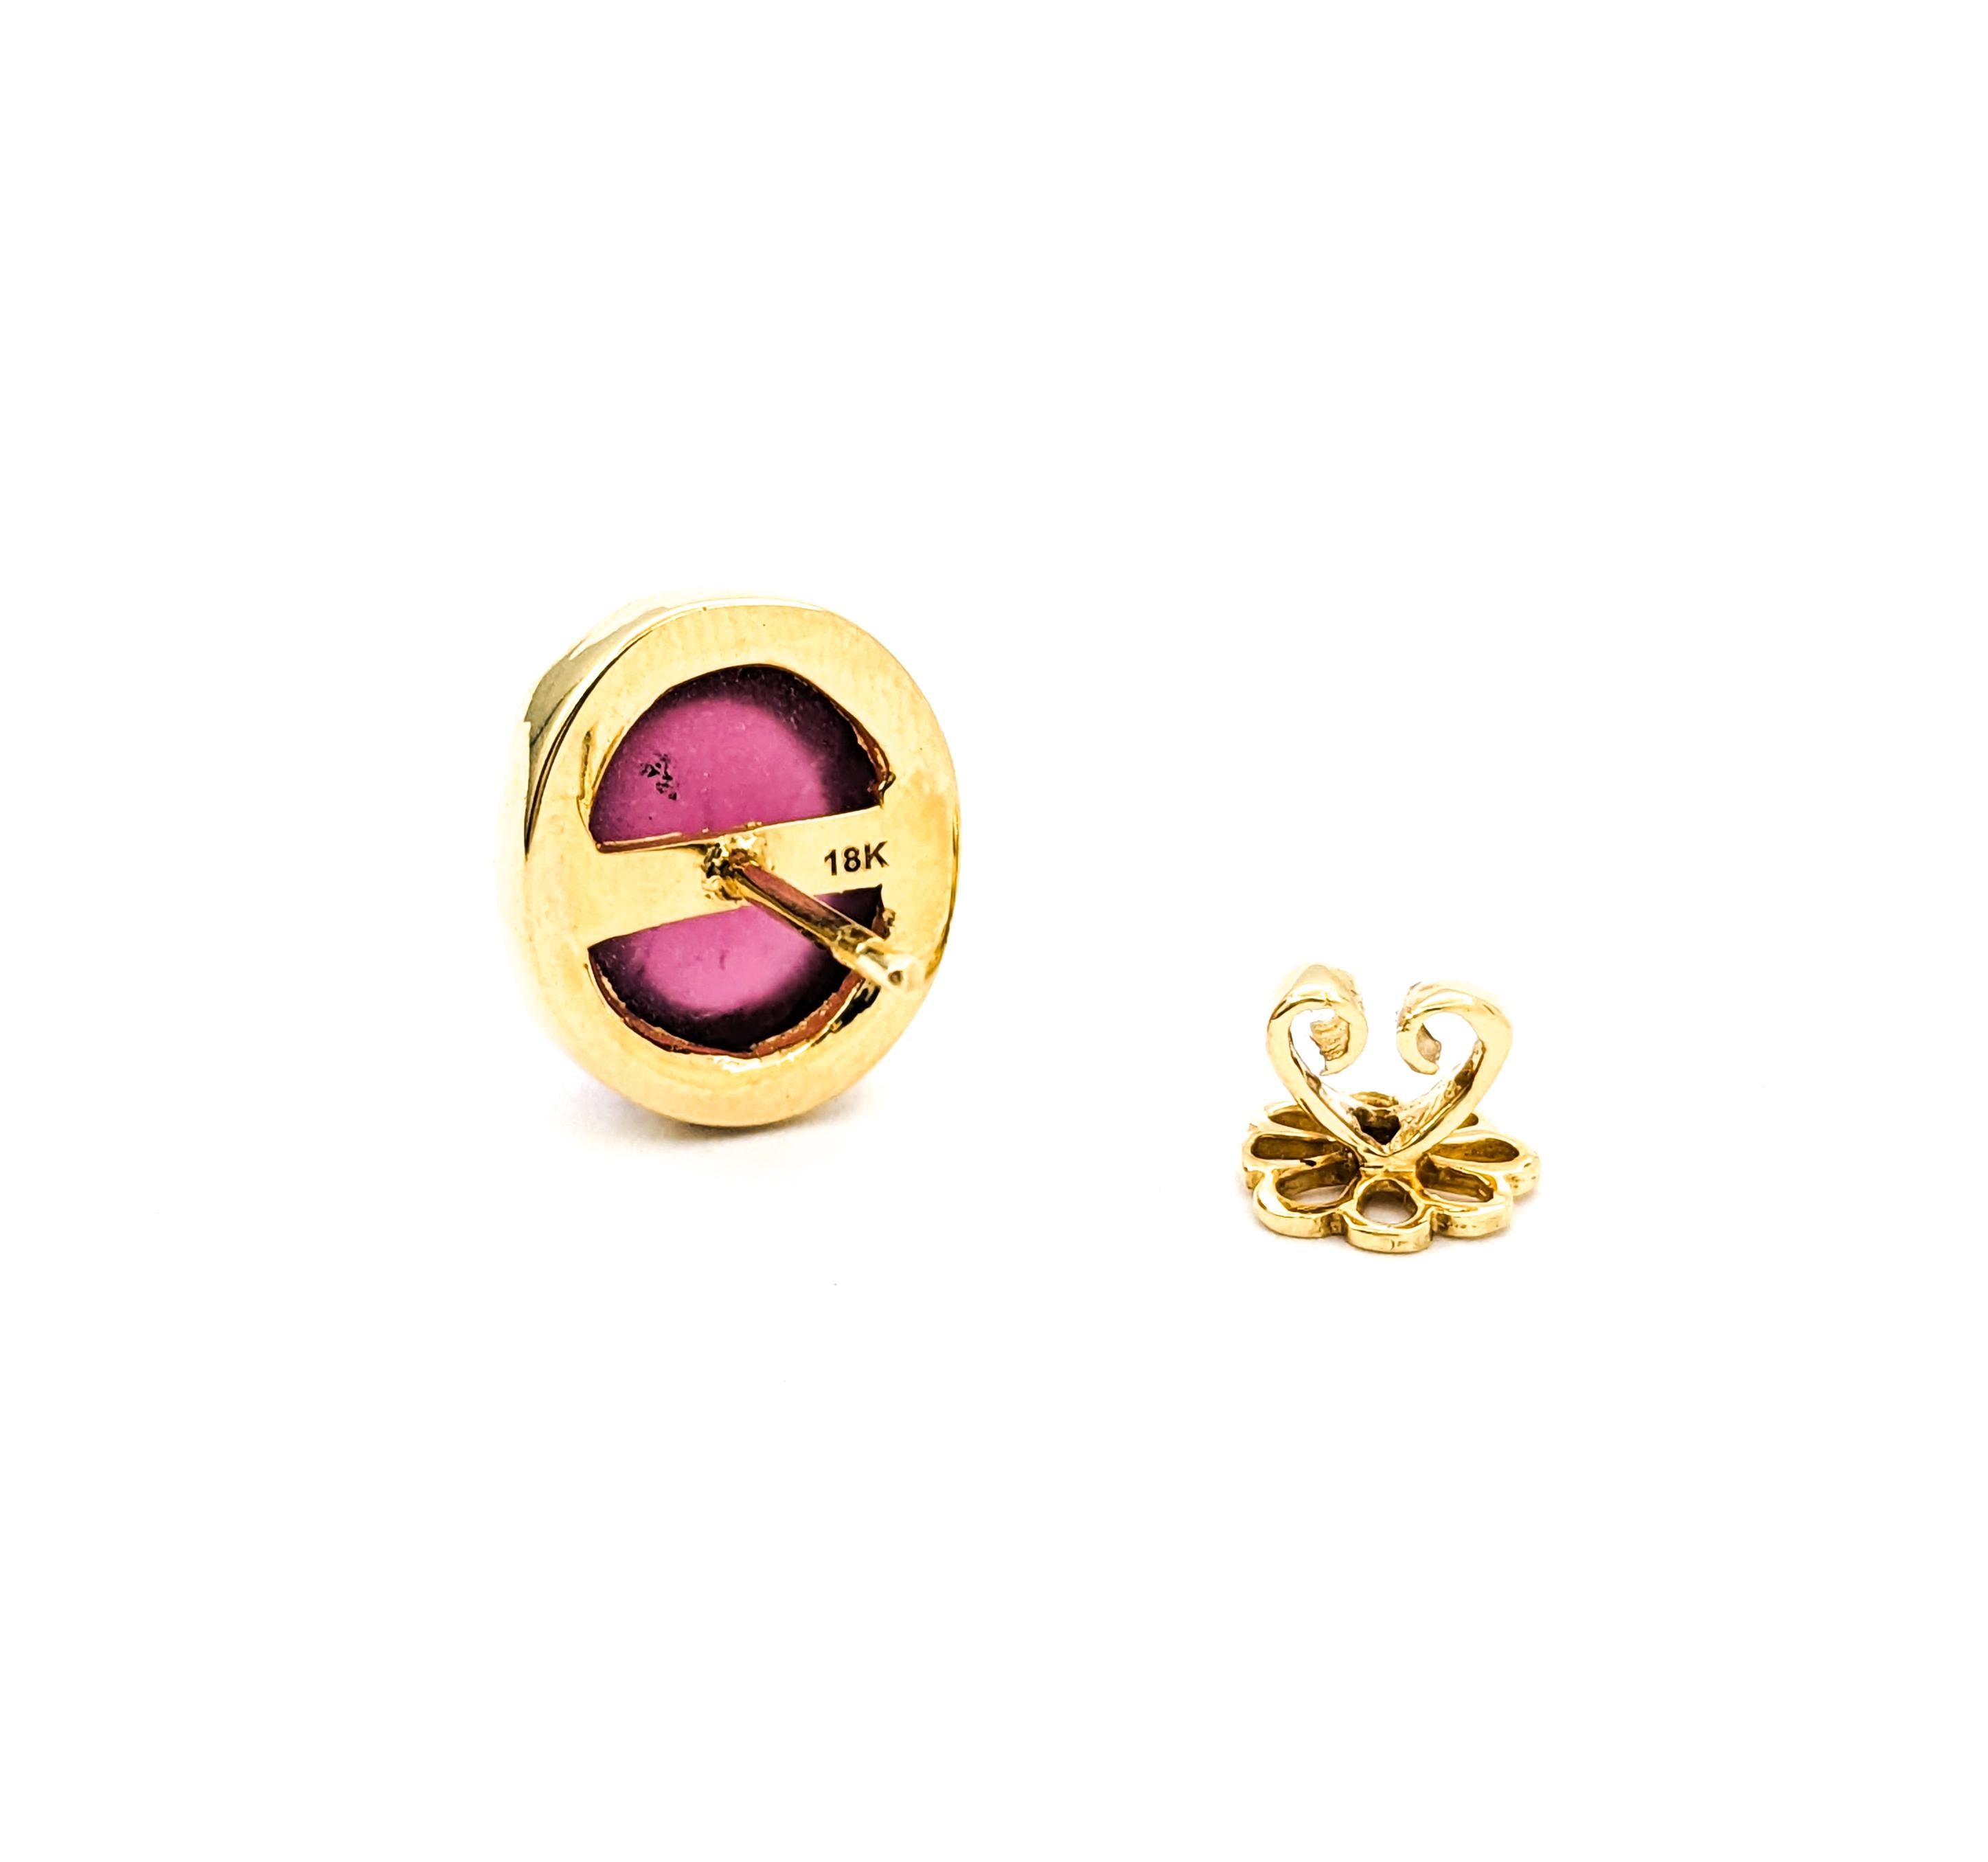 15.5ctw Cabochon Pink Tourmaline Earrings In Yellow Gold For Sale 2